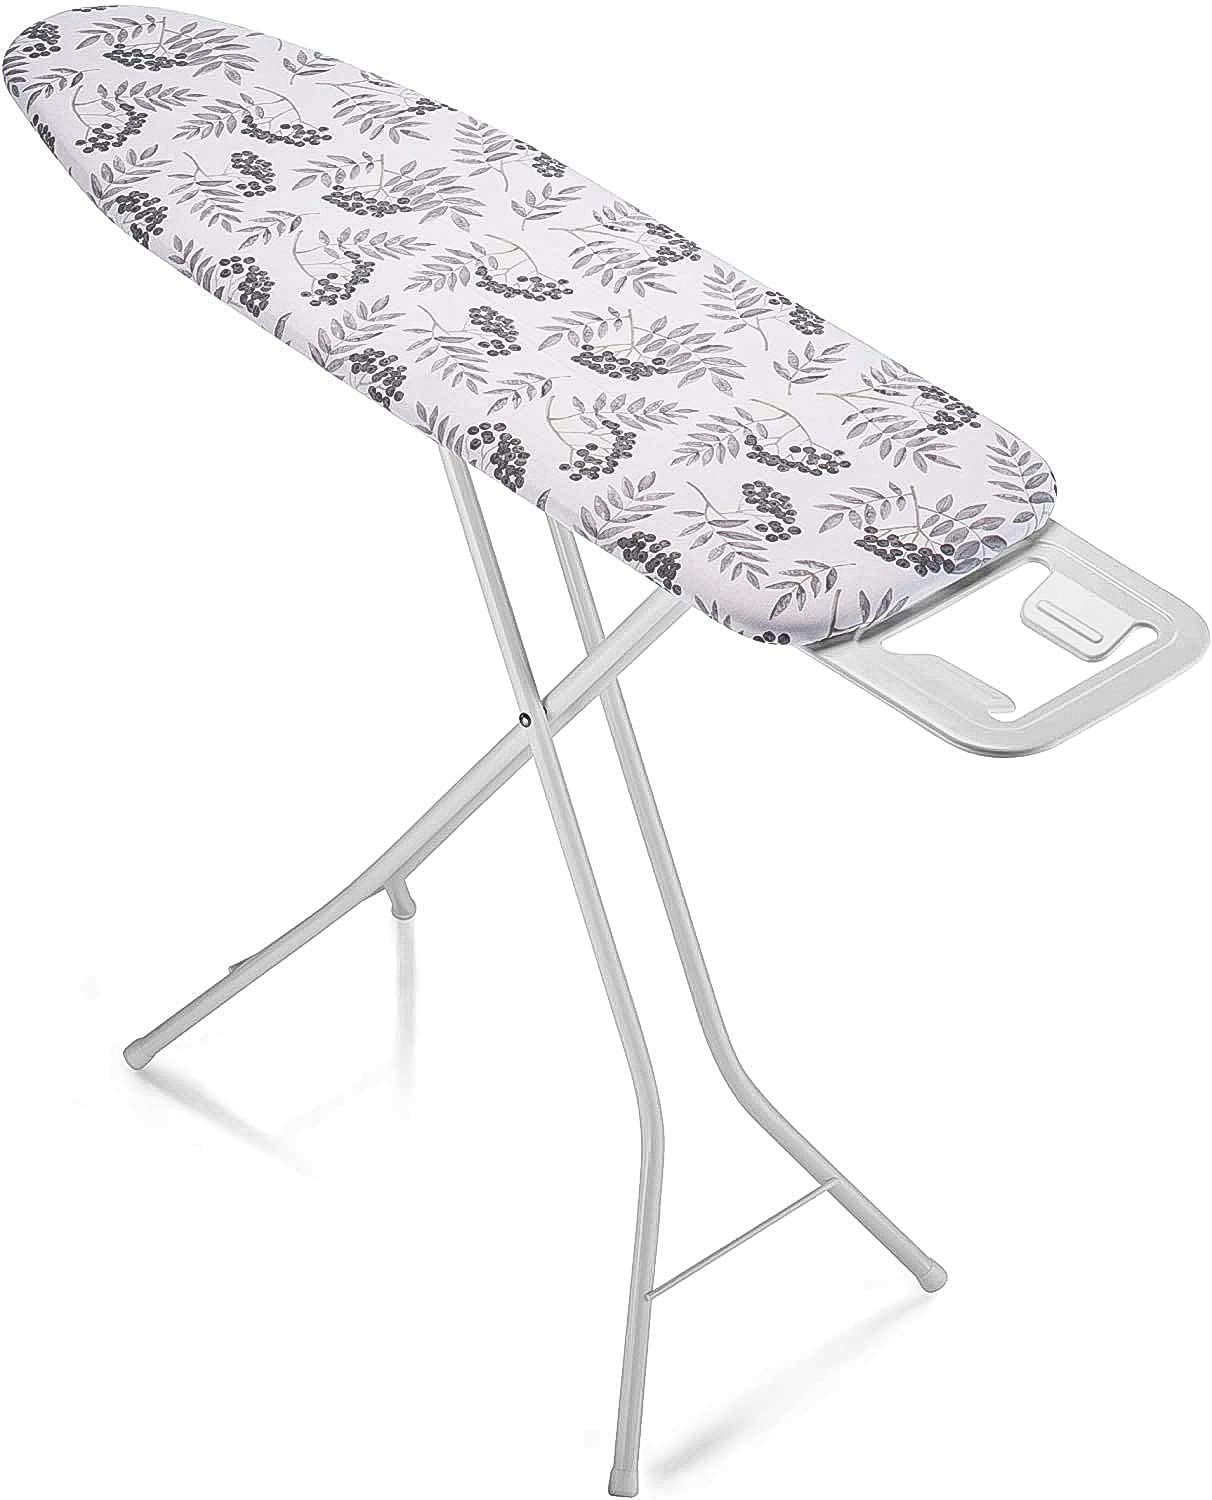 Bartnelli - 29"x36" Ironing Board With Adjustable Height, Iron Rest, 3 Layer Cover Pad, Grey & Floral